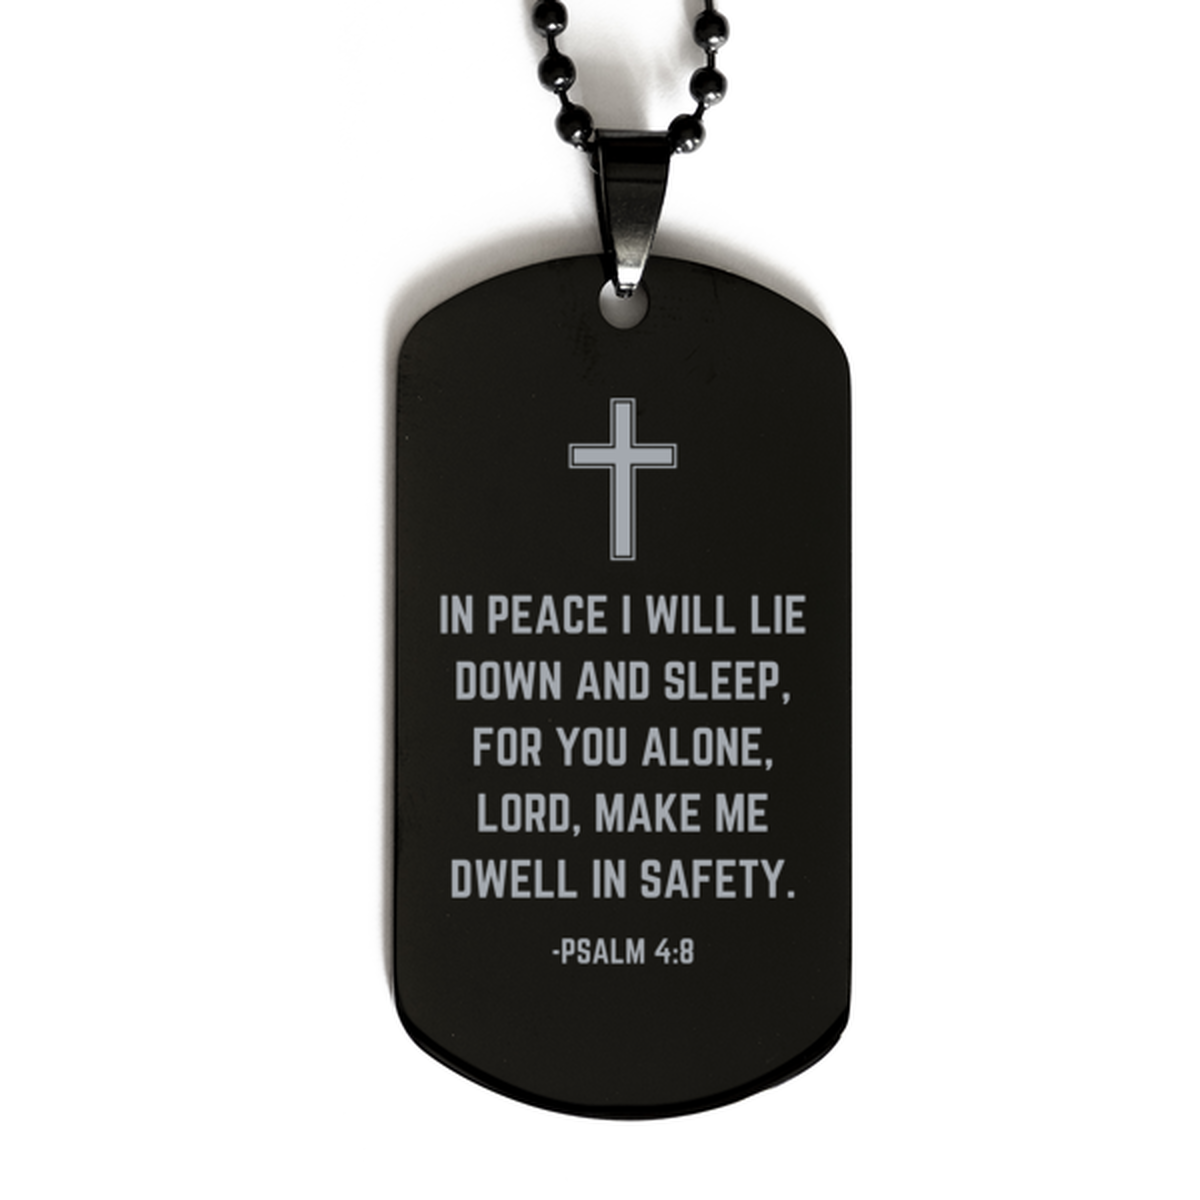 Baptism Gifts For Teenage Boys Girls, Christian Bible Verse Black Dog Tag, In peace I will lie down and sleep, Confirmation Gifts, Bible Verse Necklace for Son, Godson, Grandson, Nephew